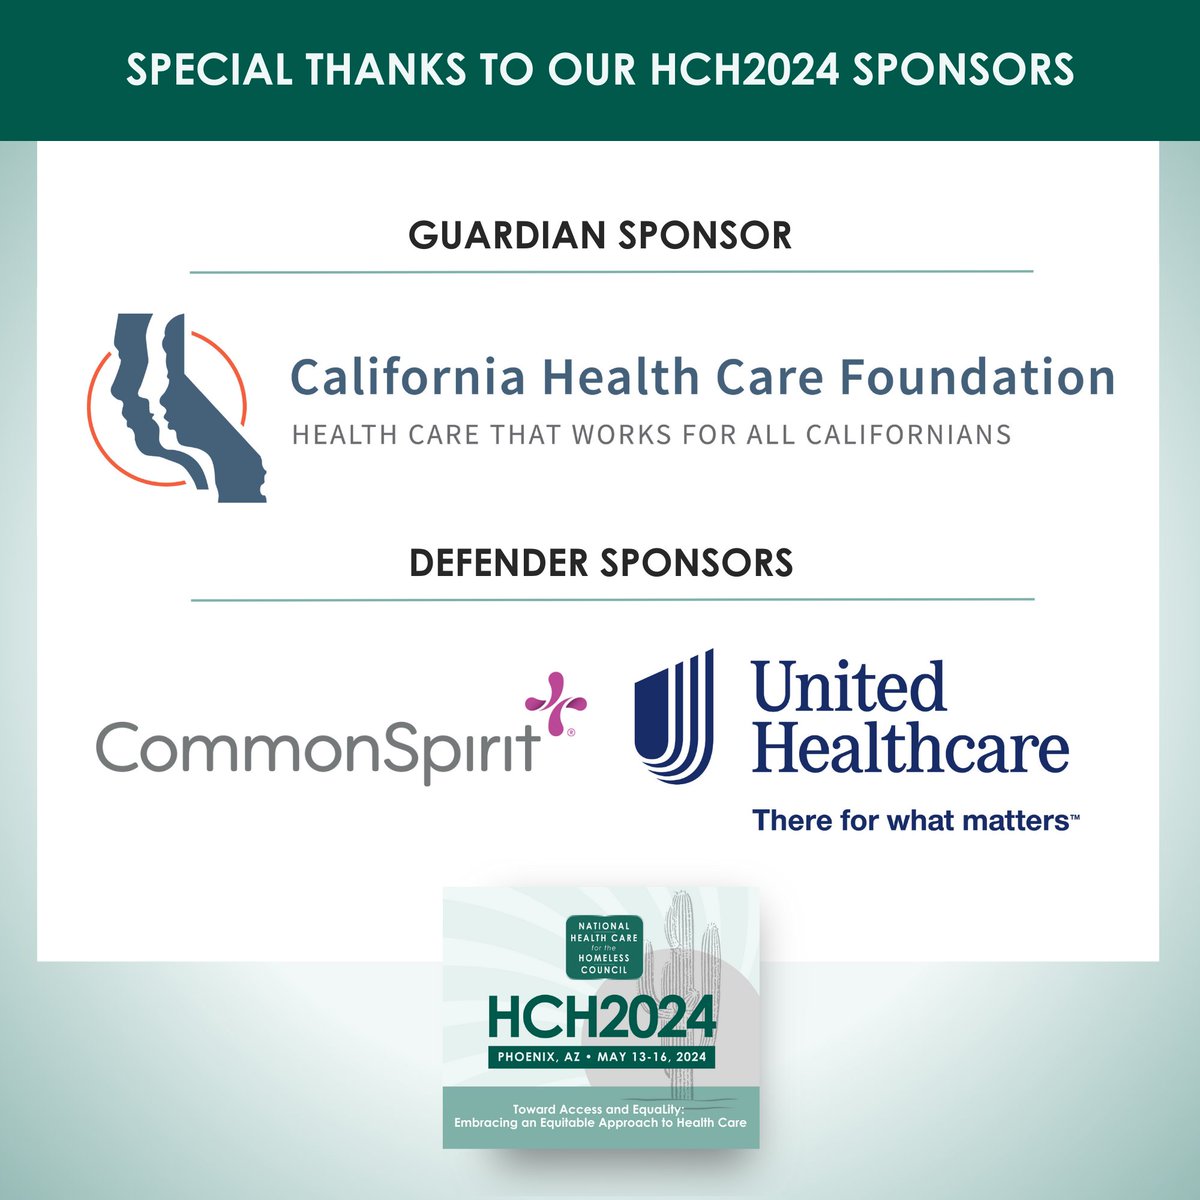 We're just ONE WEEK AWAY from #HCH2024 — the country's largest gathering of HCH practitioners, researchers, and advocates! Special thanks to our sponsors for making this event possible. We'll see you next week in Phoenix!